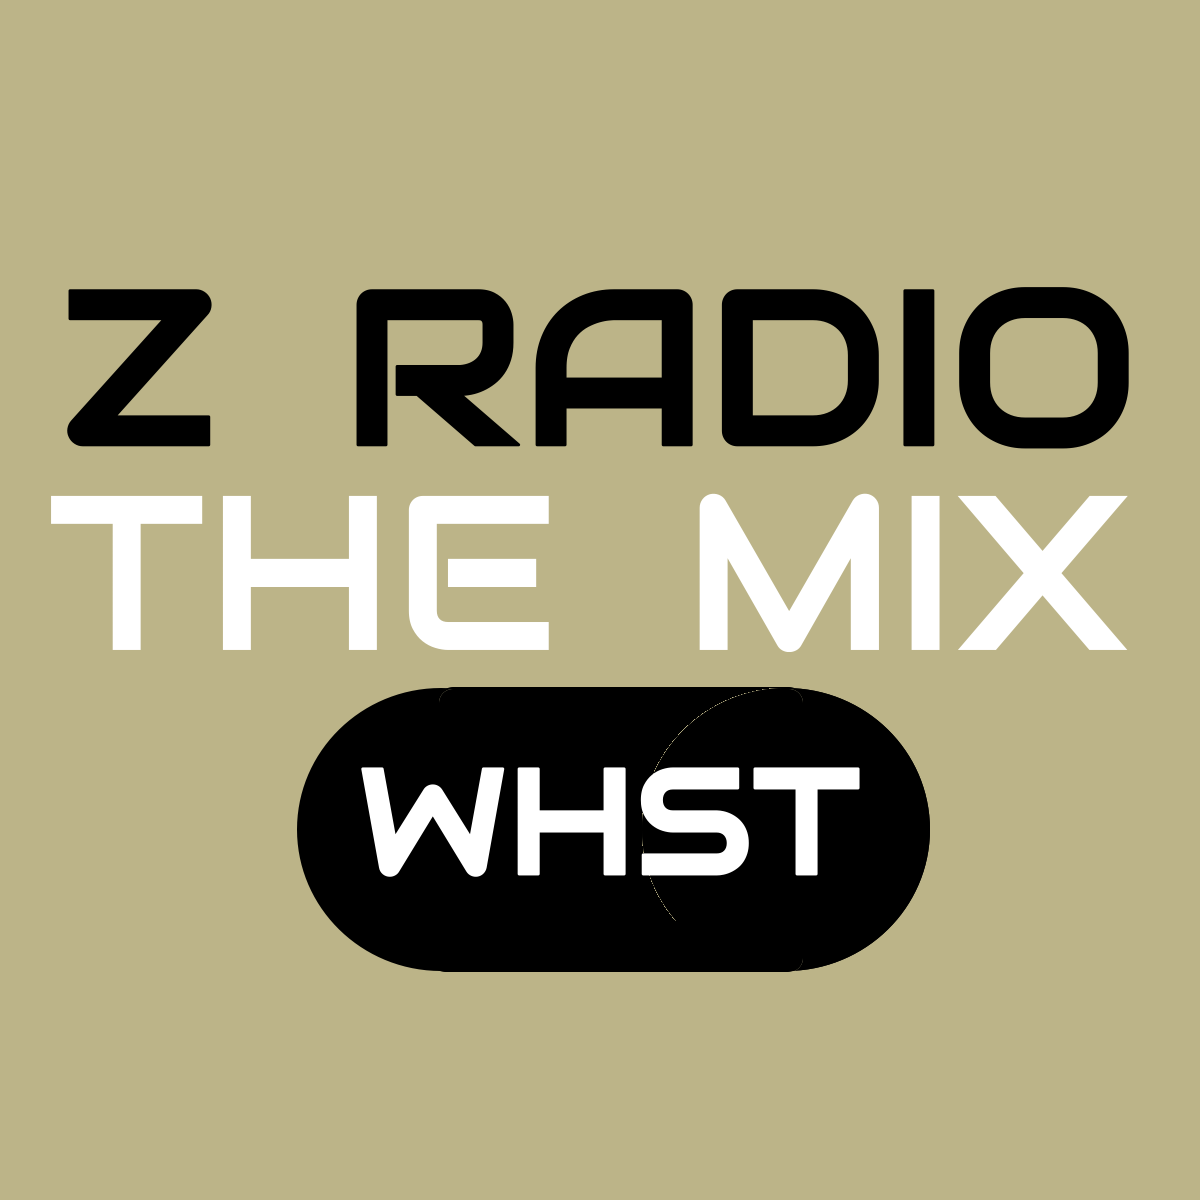 Art for Z ID Songs that speak of faith music thats good for your family 1 by Z Radio The Mix